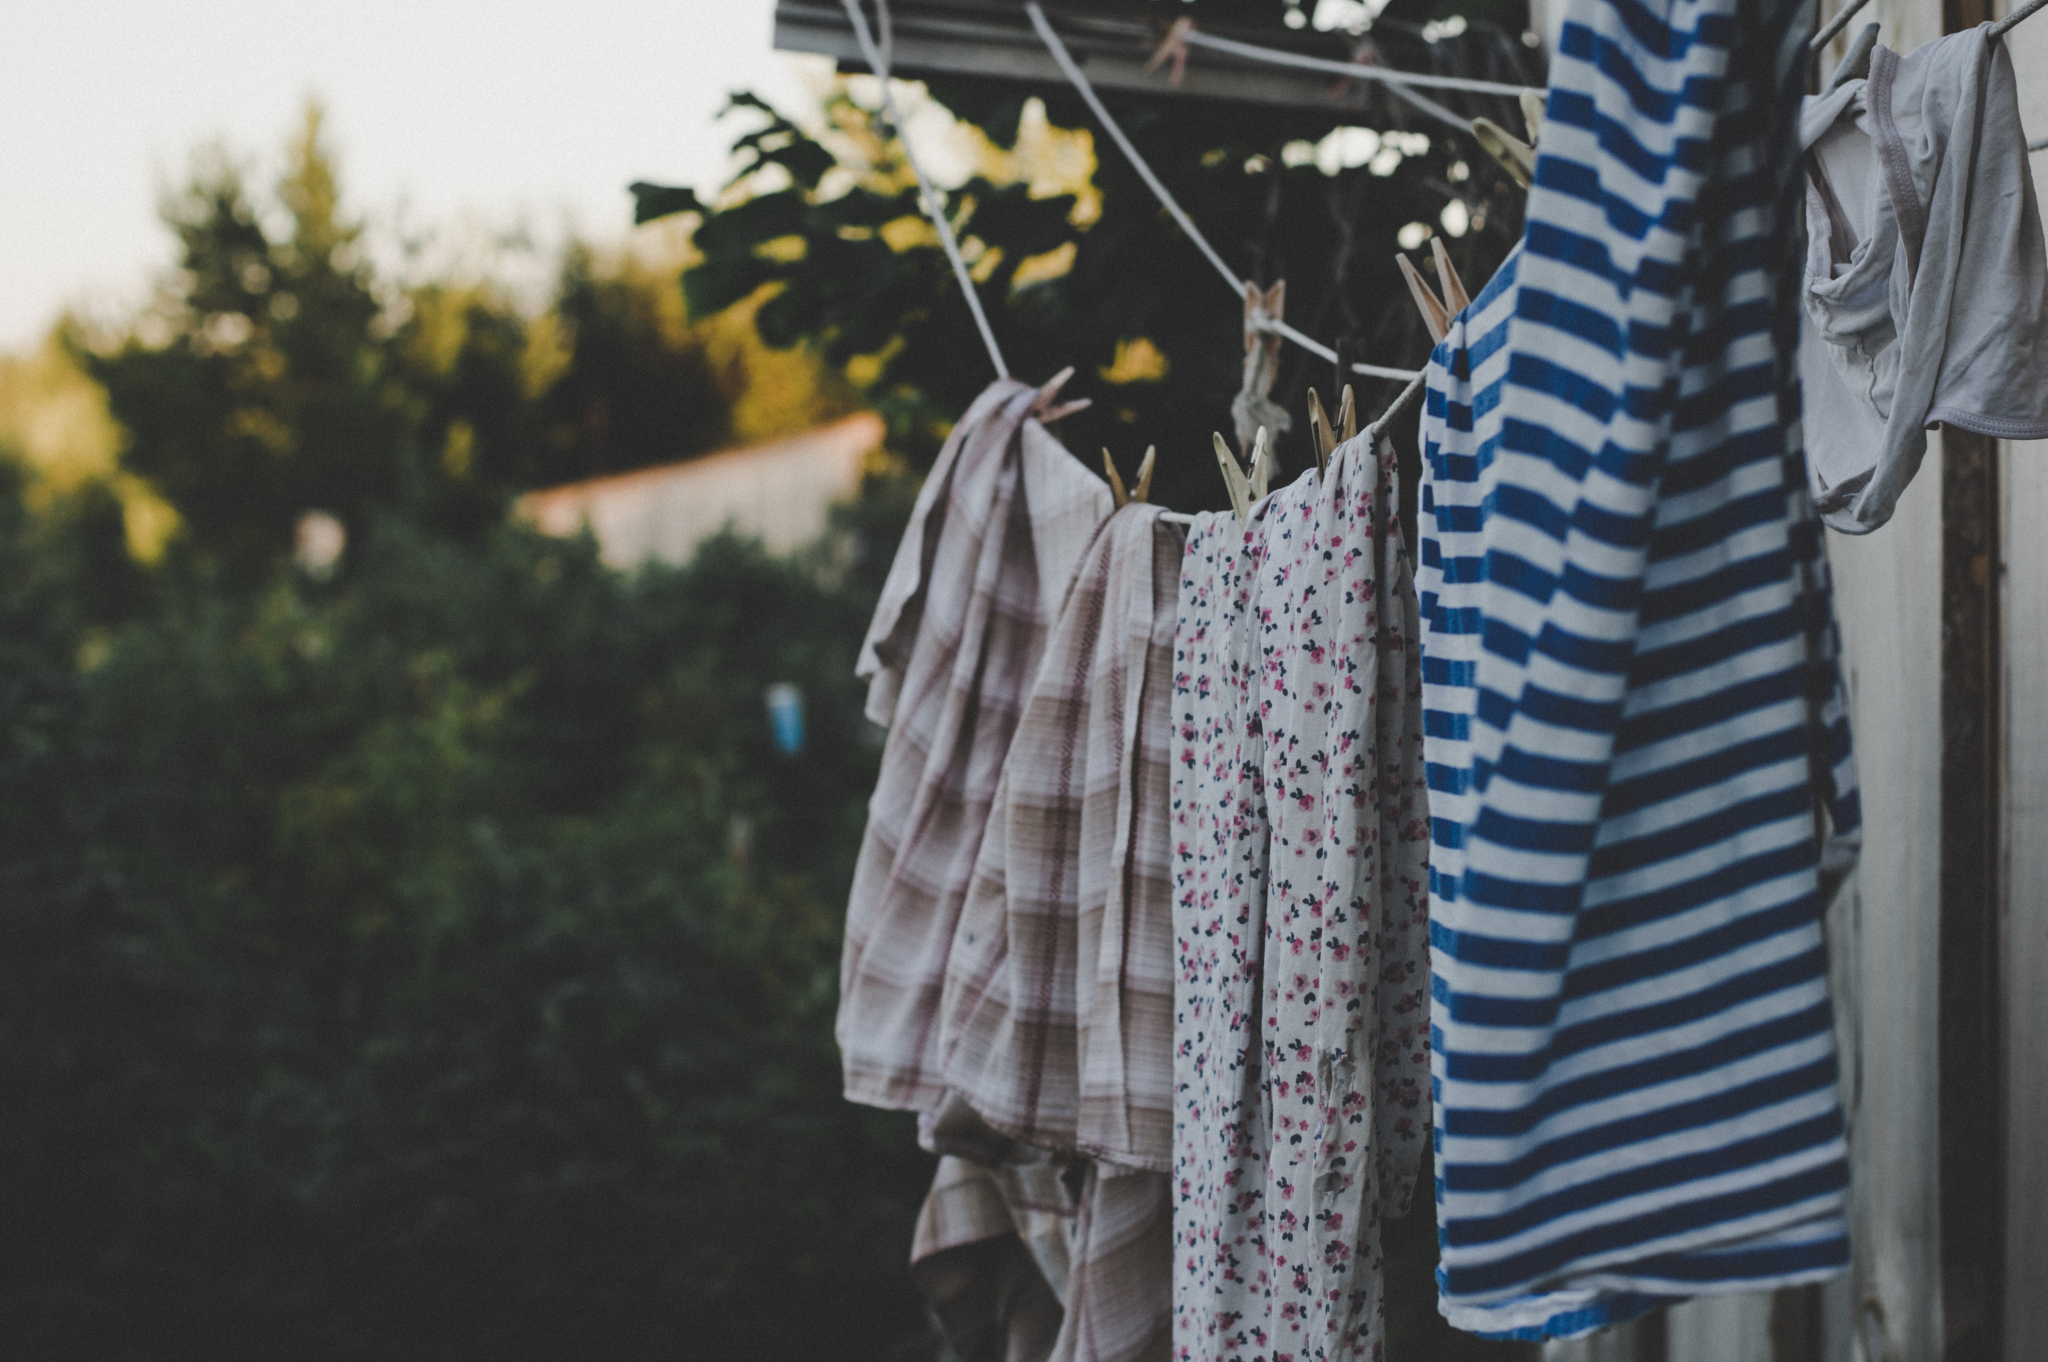 Colorful clothes hanging to dry outside, embracing eco-friendly laundry practices.